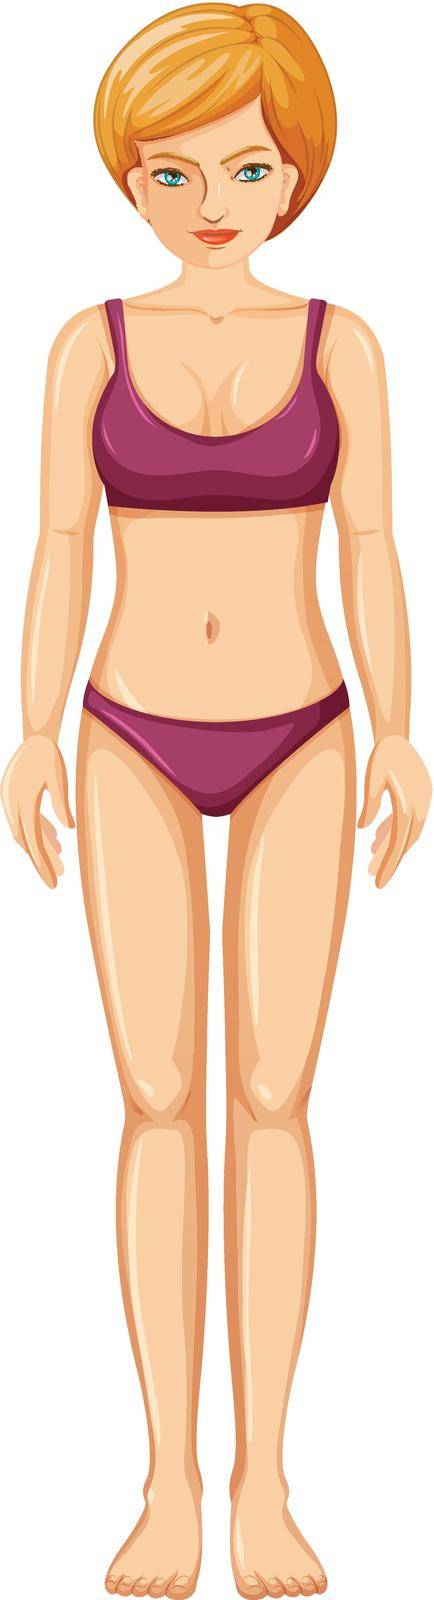 A Vector of Female Body illustration